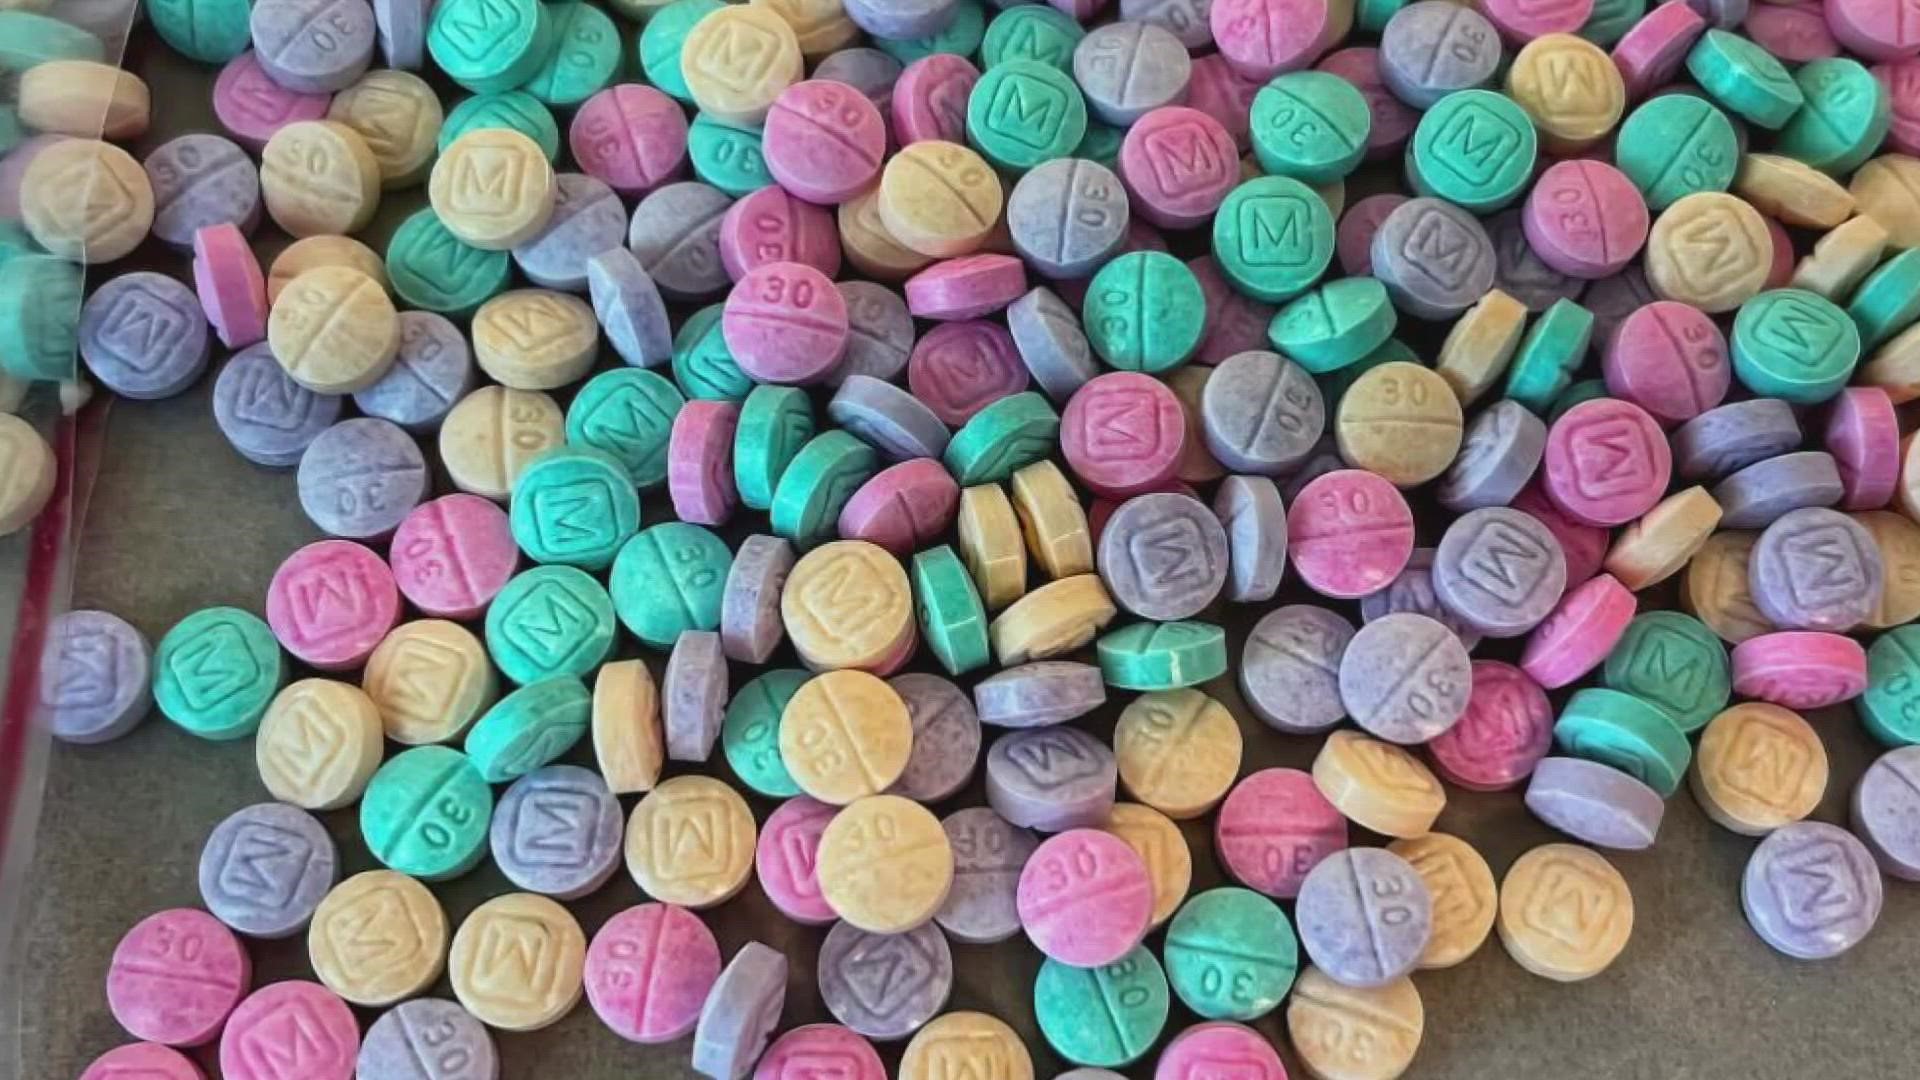 It is still unknown if this multi-colored fentanyl is targeting teens, but Idaho State Police is warning parents to be aware of this drug.